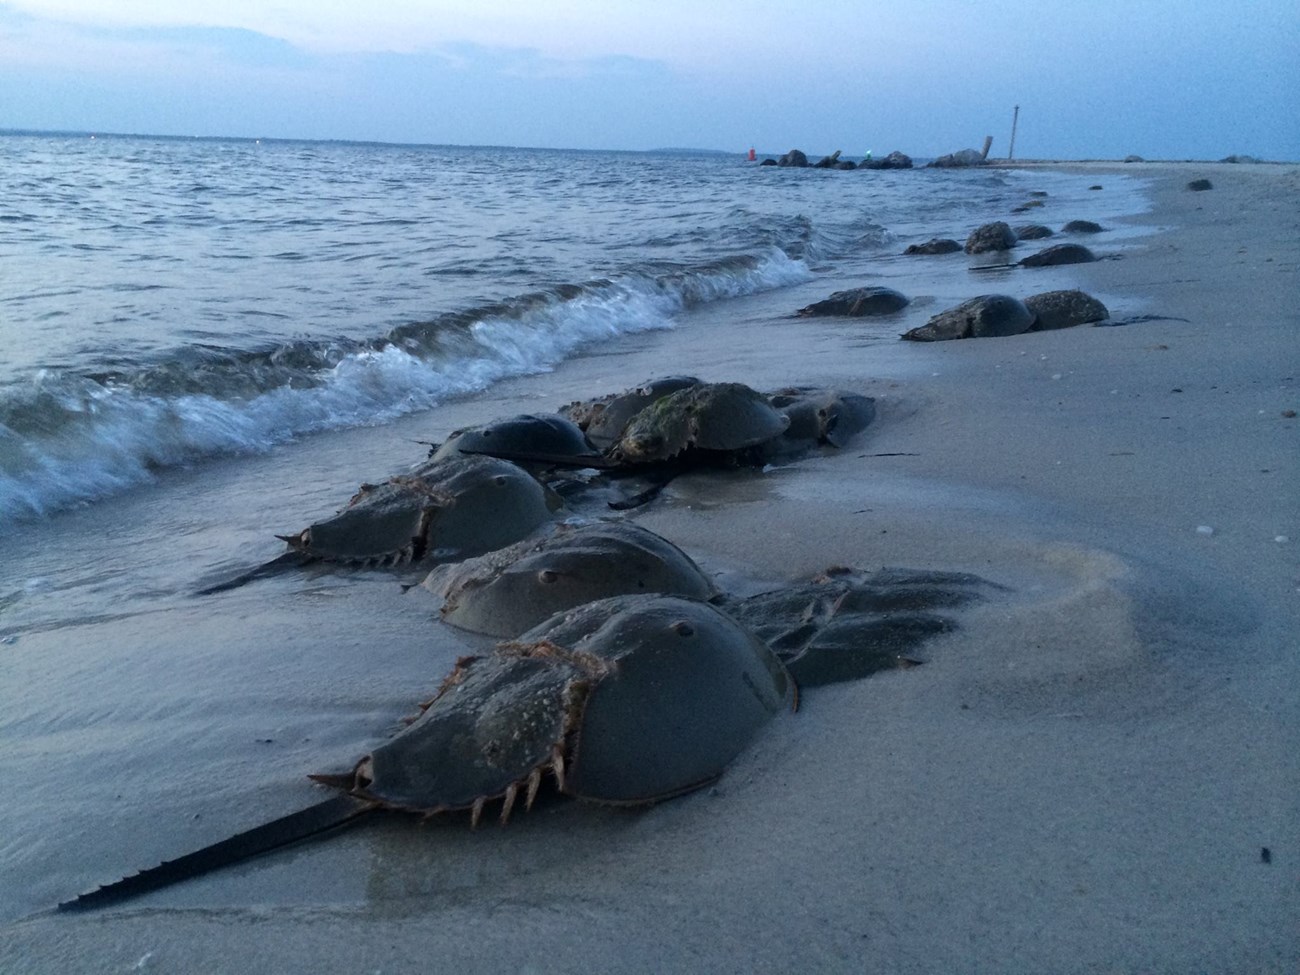 Horseshoe crabs converge while wave lap on the shores of a beach